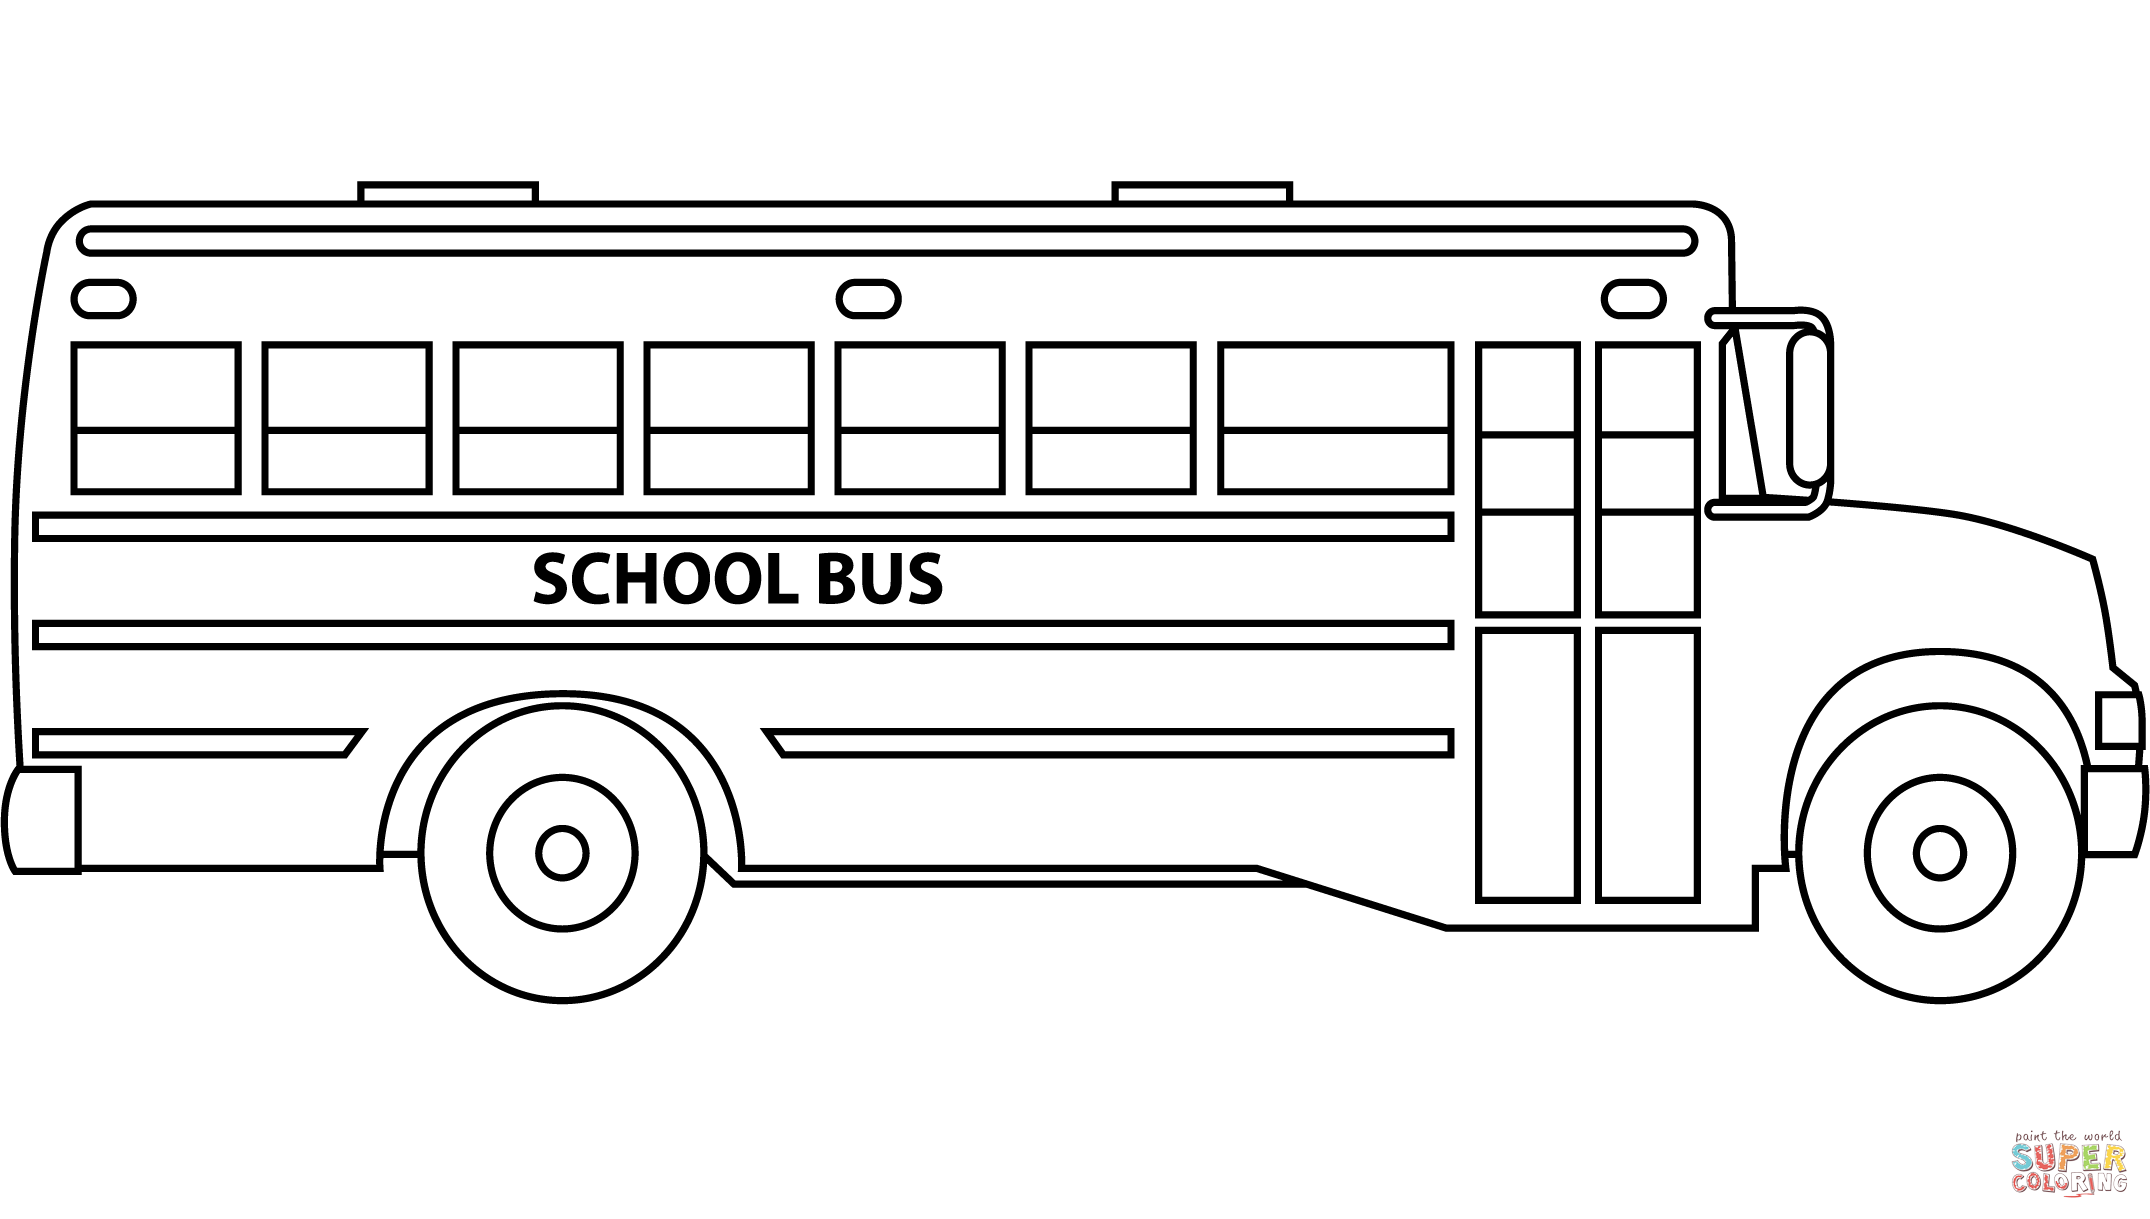 School bus coloring page free printable coloring pages